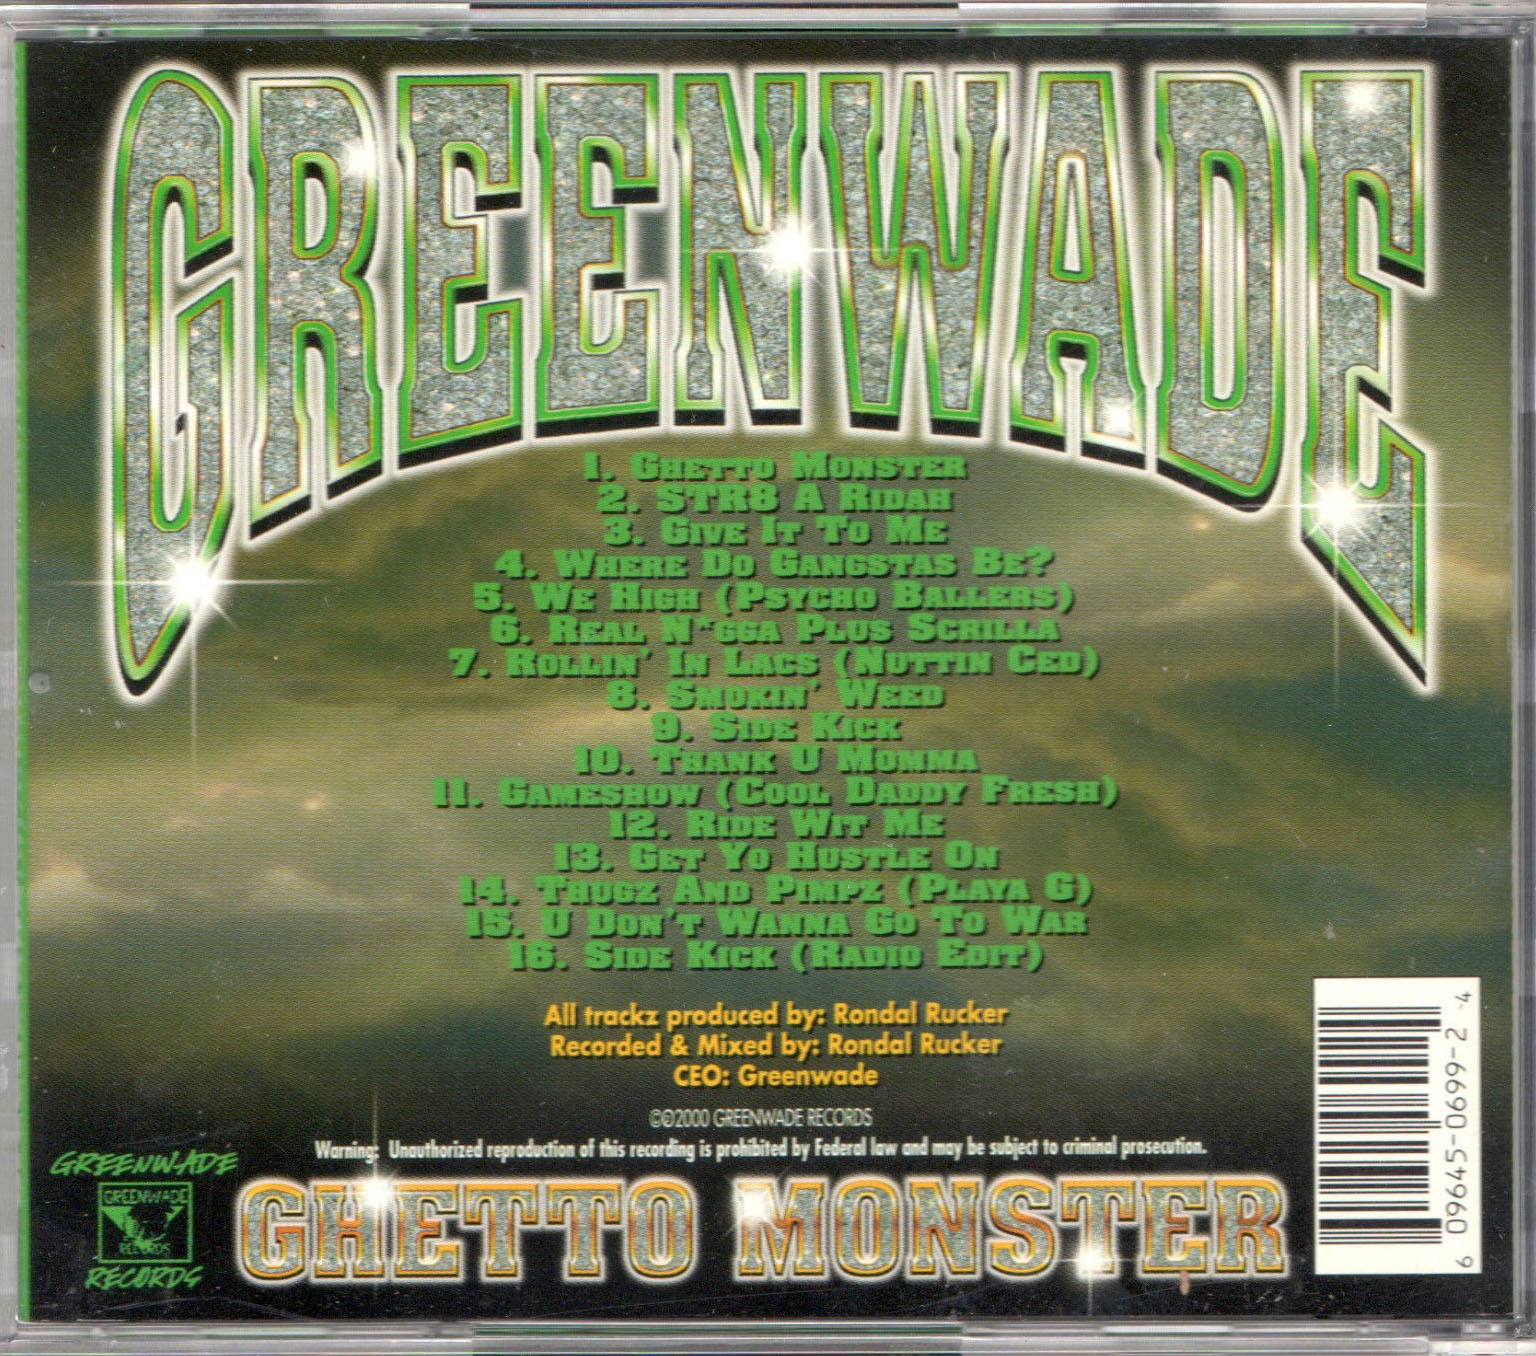 Greenwade (Crime Laced Records, Greenwade Records) in Nashville